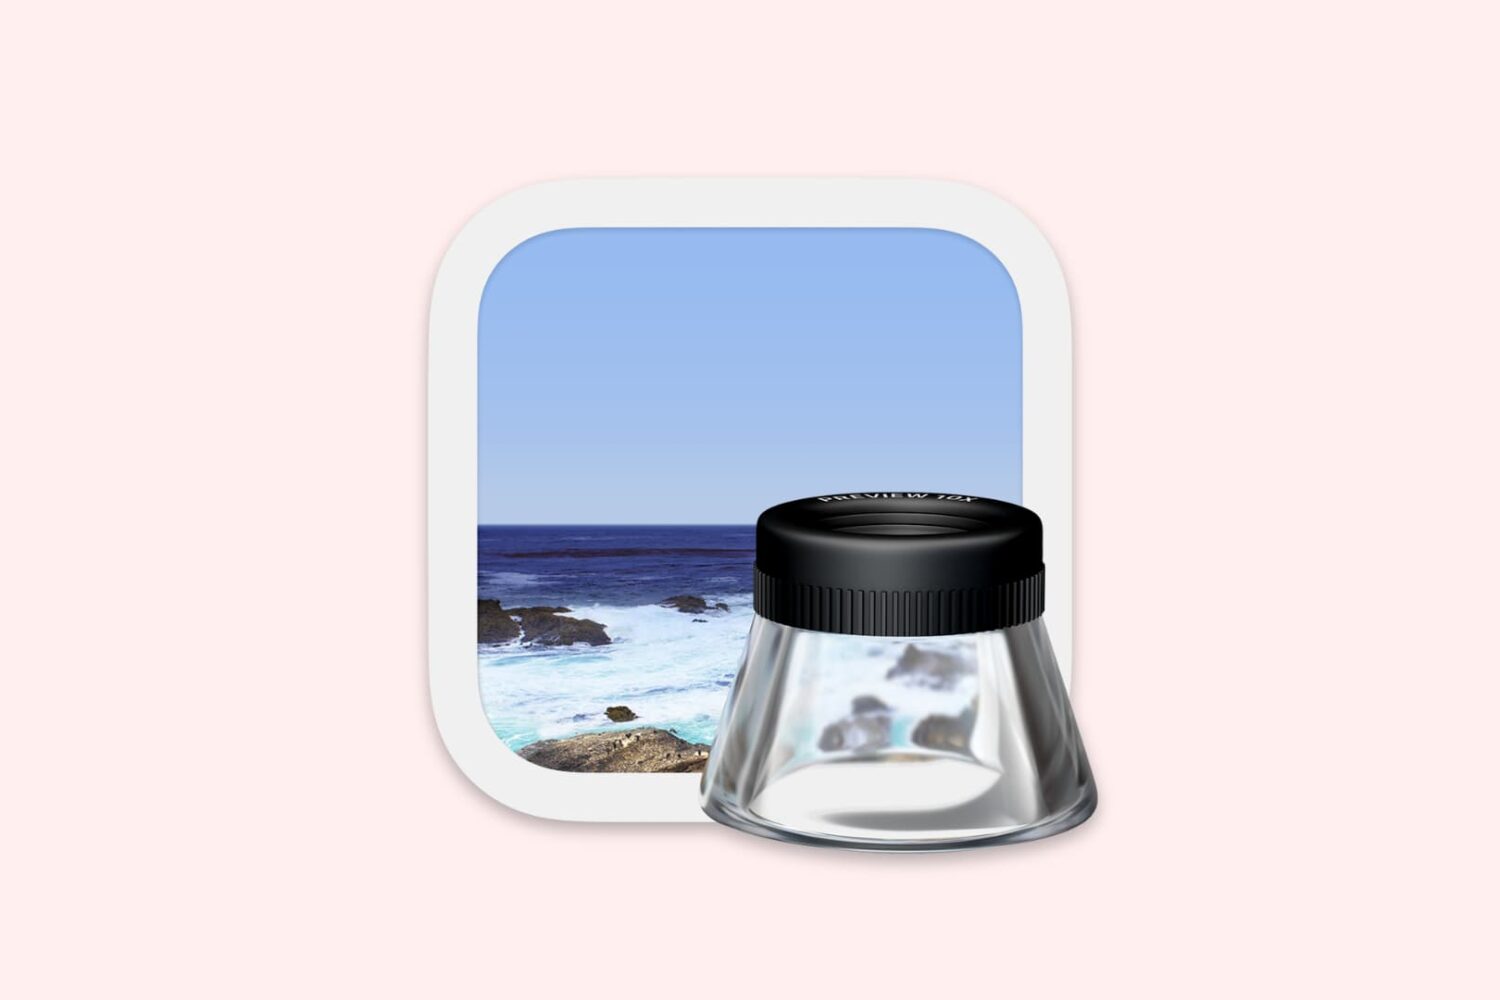 Preview app icon for Mac